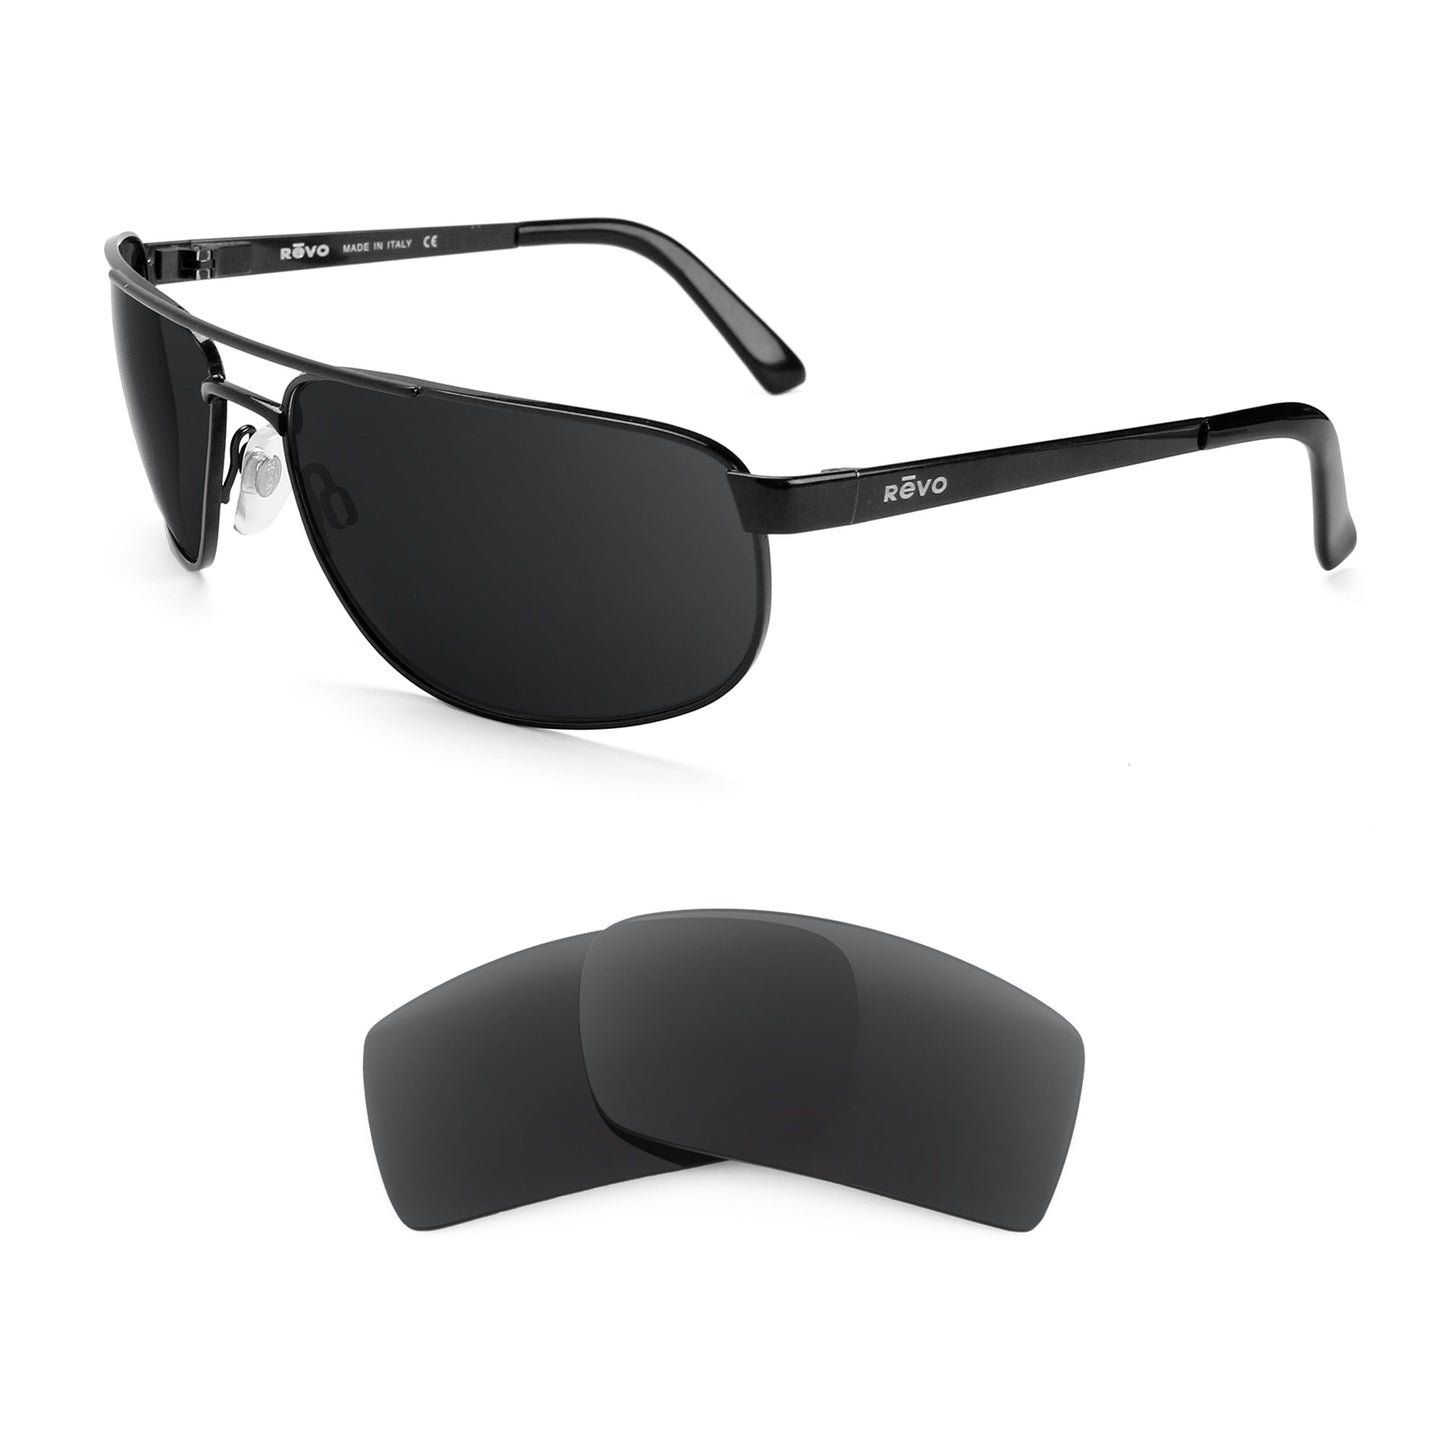 Revo 3011 sunglasses with replacement lenses